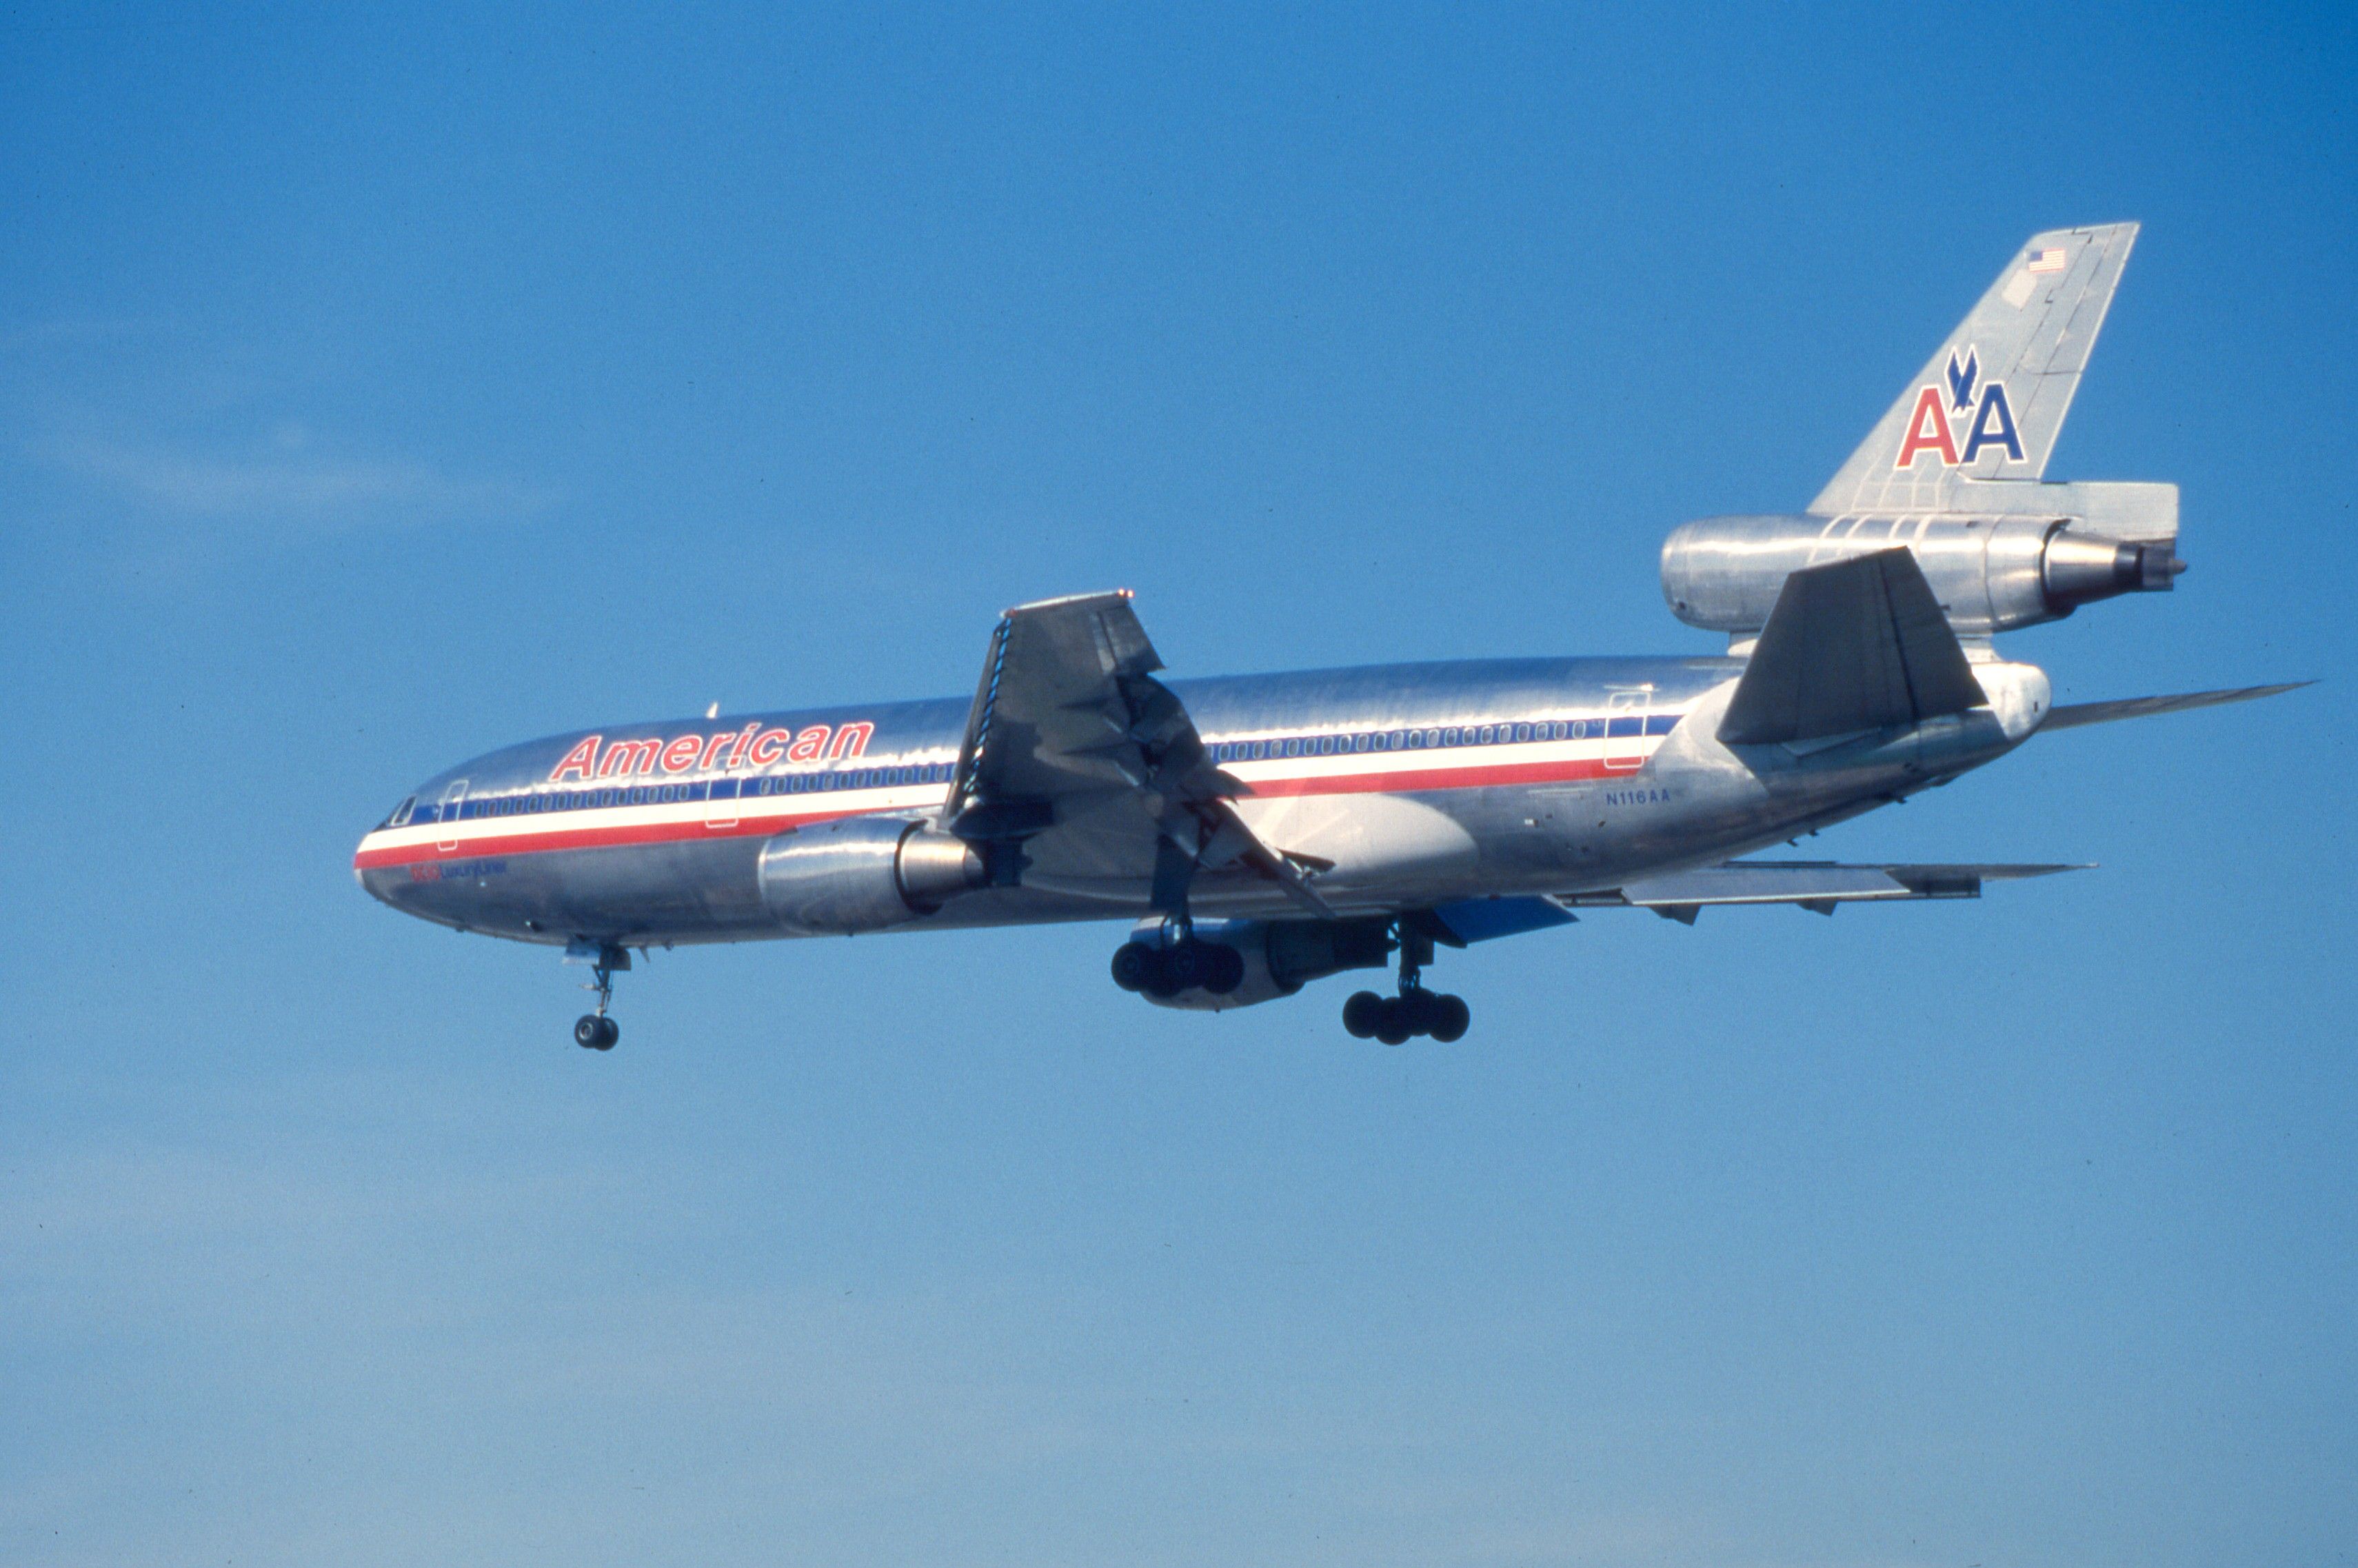 An American Airlines McDonnell Douglas DC-10 flying in the sky.